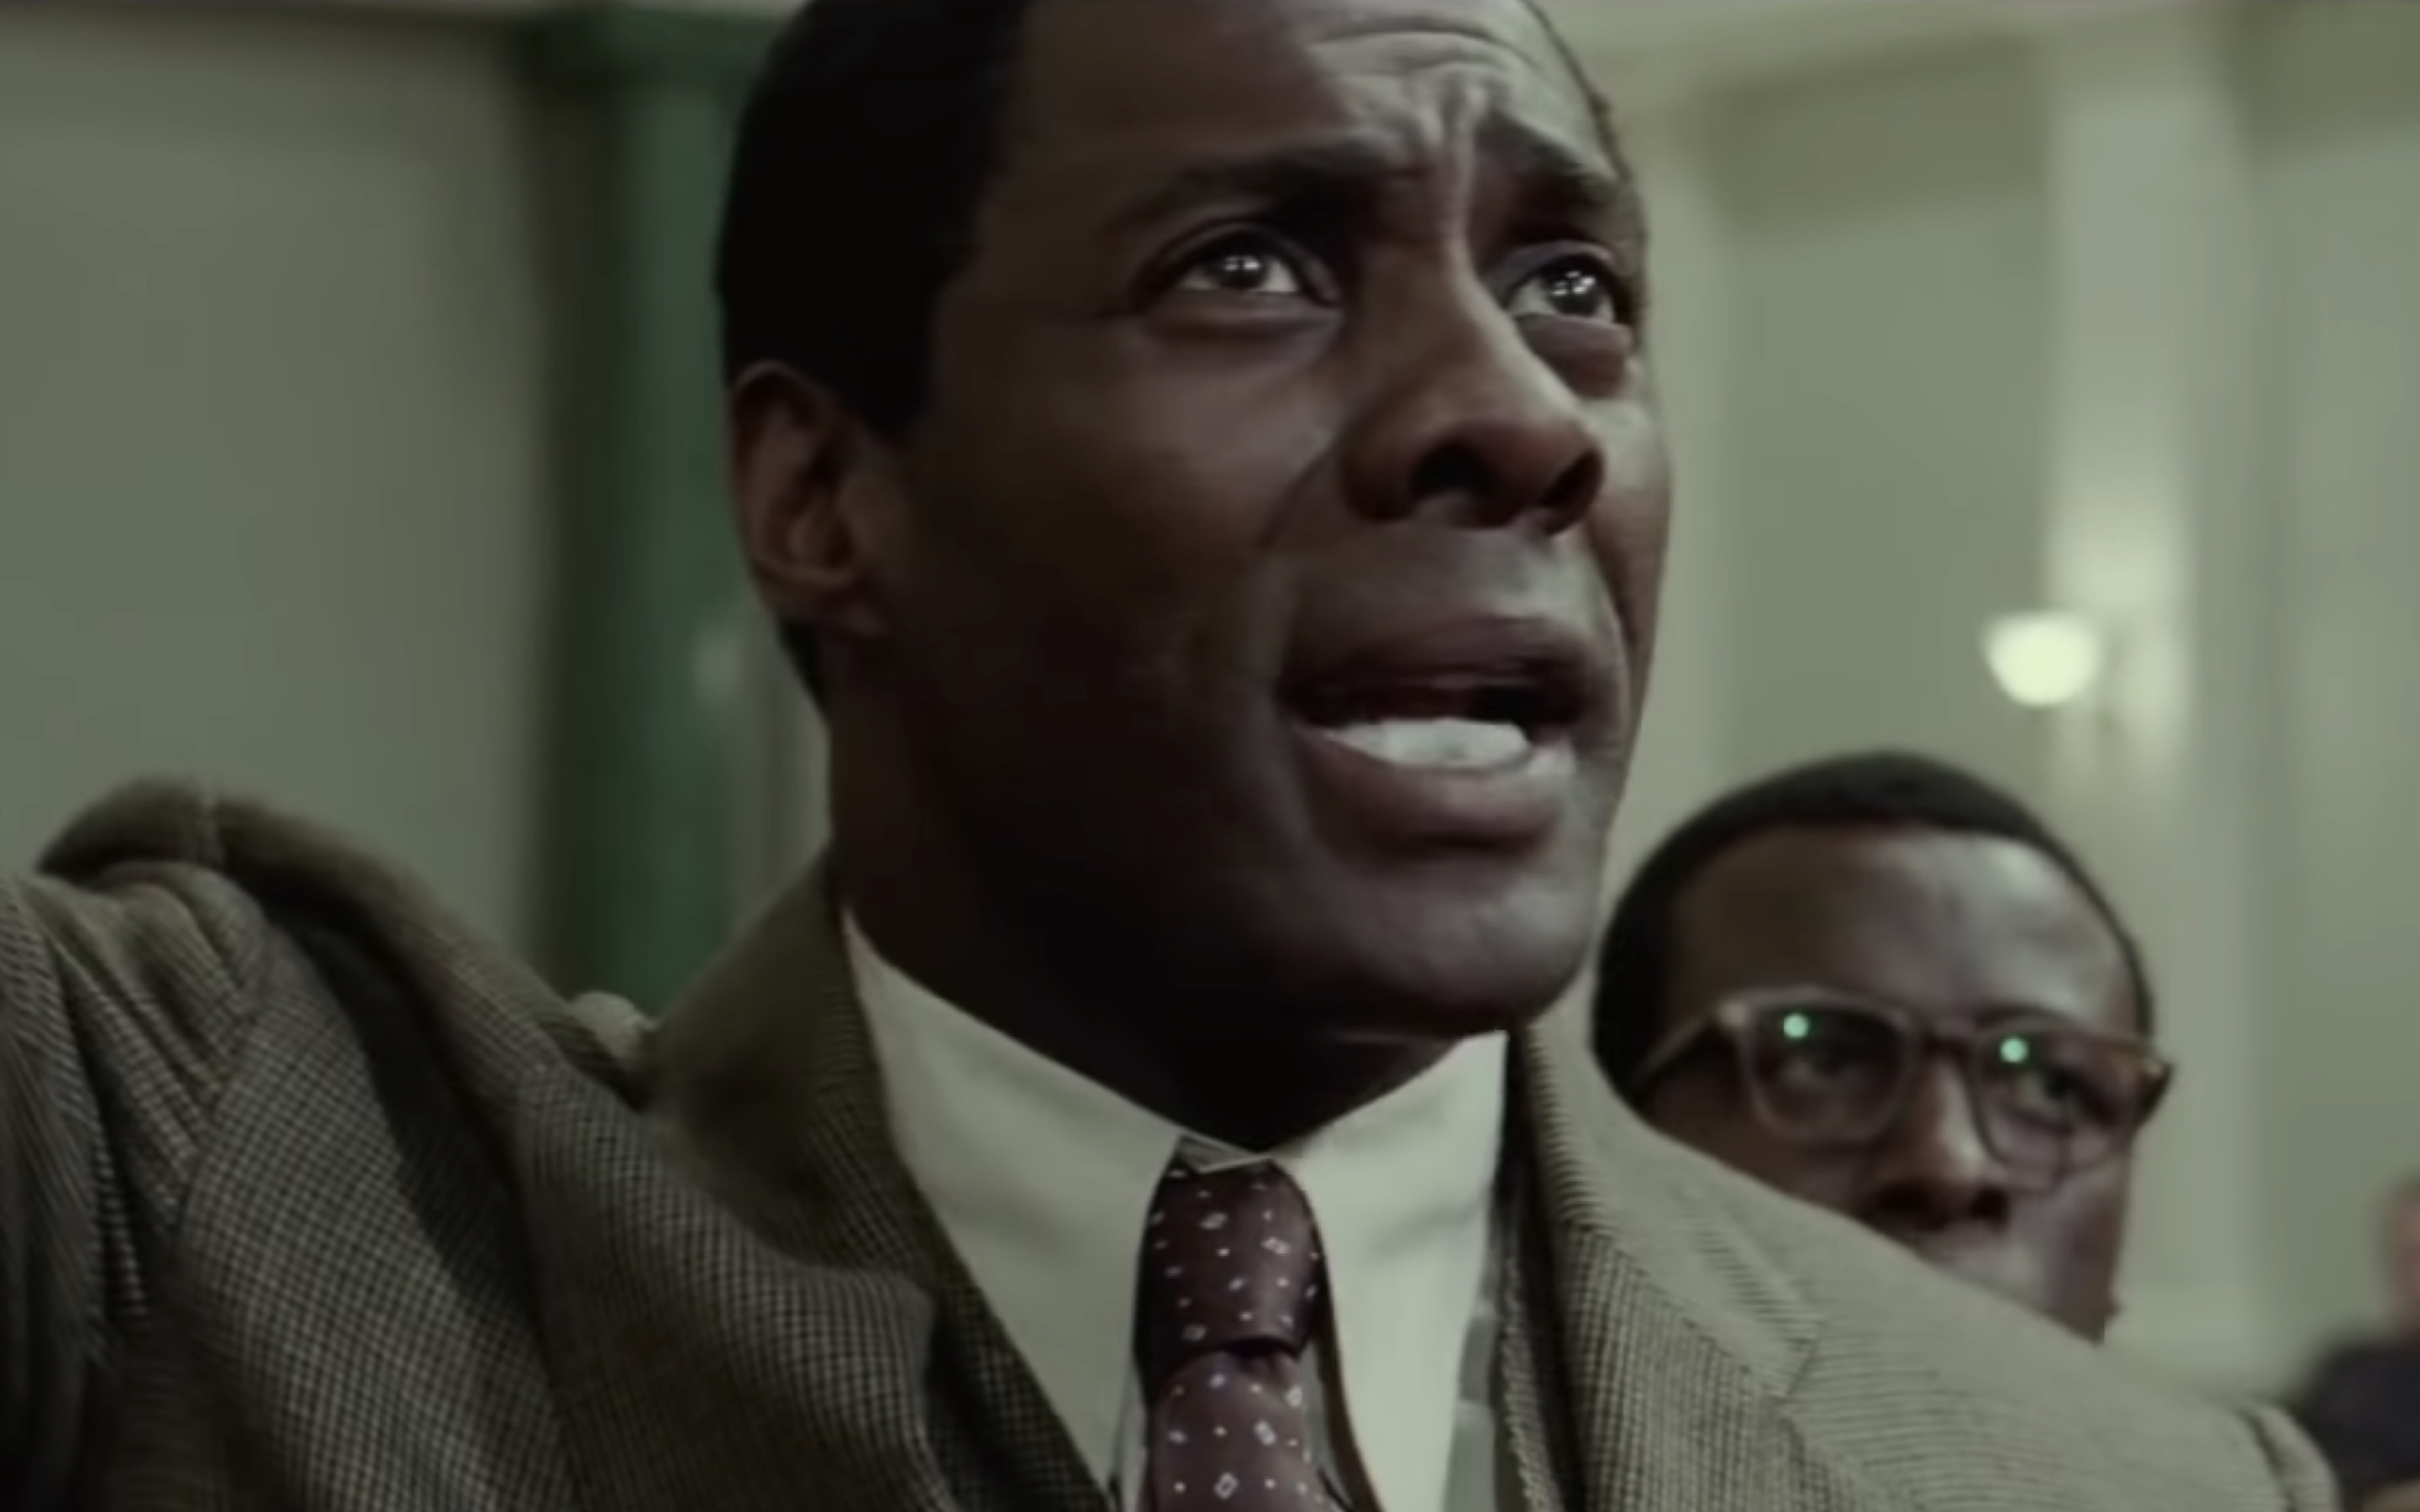 Idris Elba as Nelson Mandela in the biopic ‘Mandela: Long Walk to Freedom’, which will be one of many films being screened over the weekend by Golden Scene. Screengrab via YouTube.